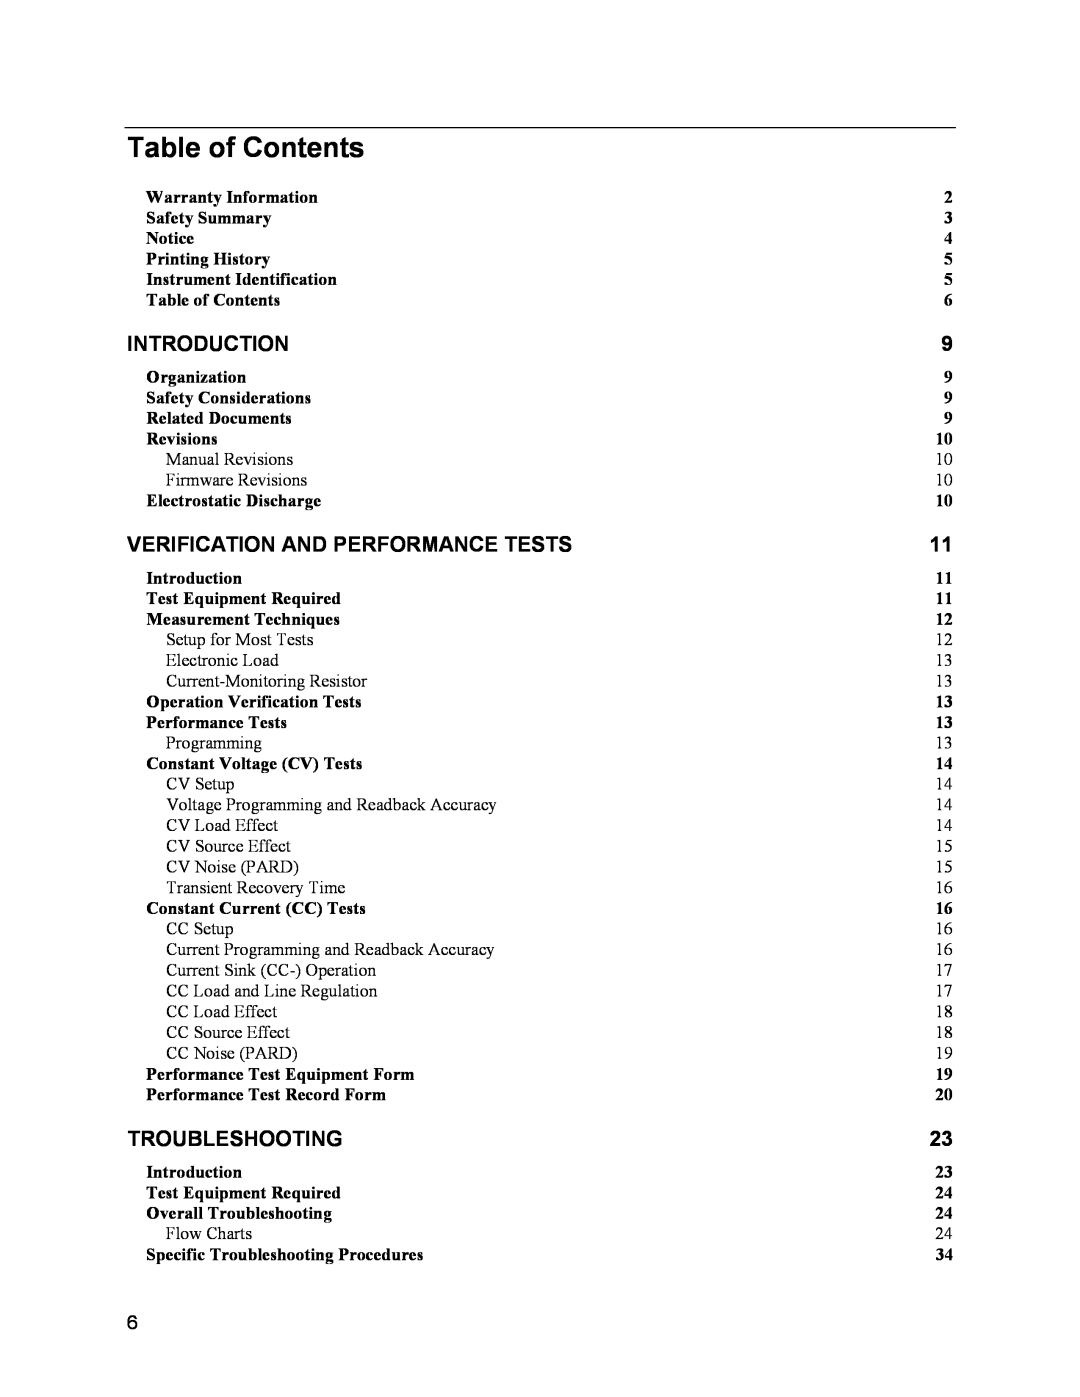 Agilent Technologies 6633B, 6634B Table of Contents, Introduction, Verification And Performance Tests, Troubleshooting 